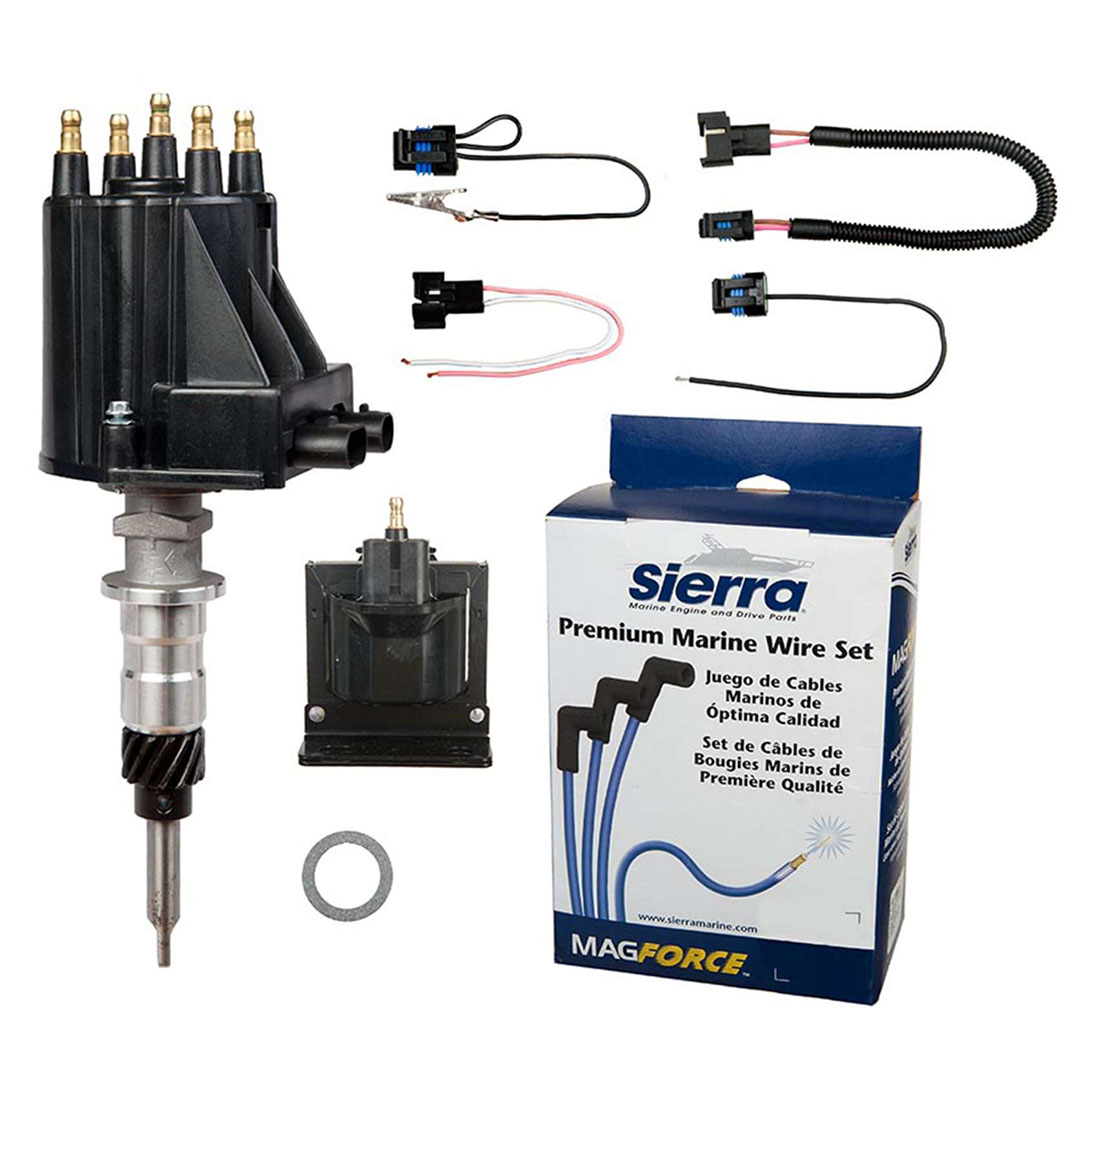 ELECTRONIC IGNITION DISTRIBUTOR KIT FOR 3.0 GM ENGINES DELCO EST